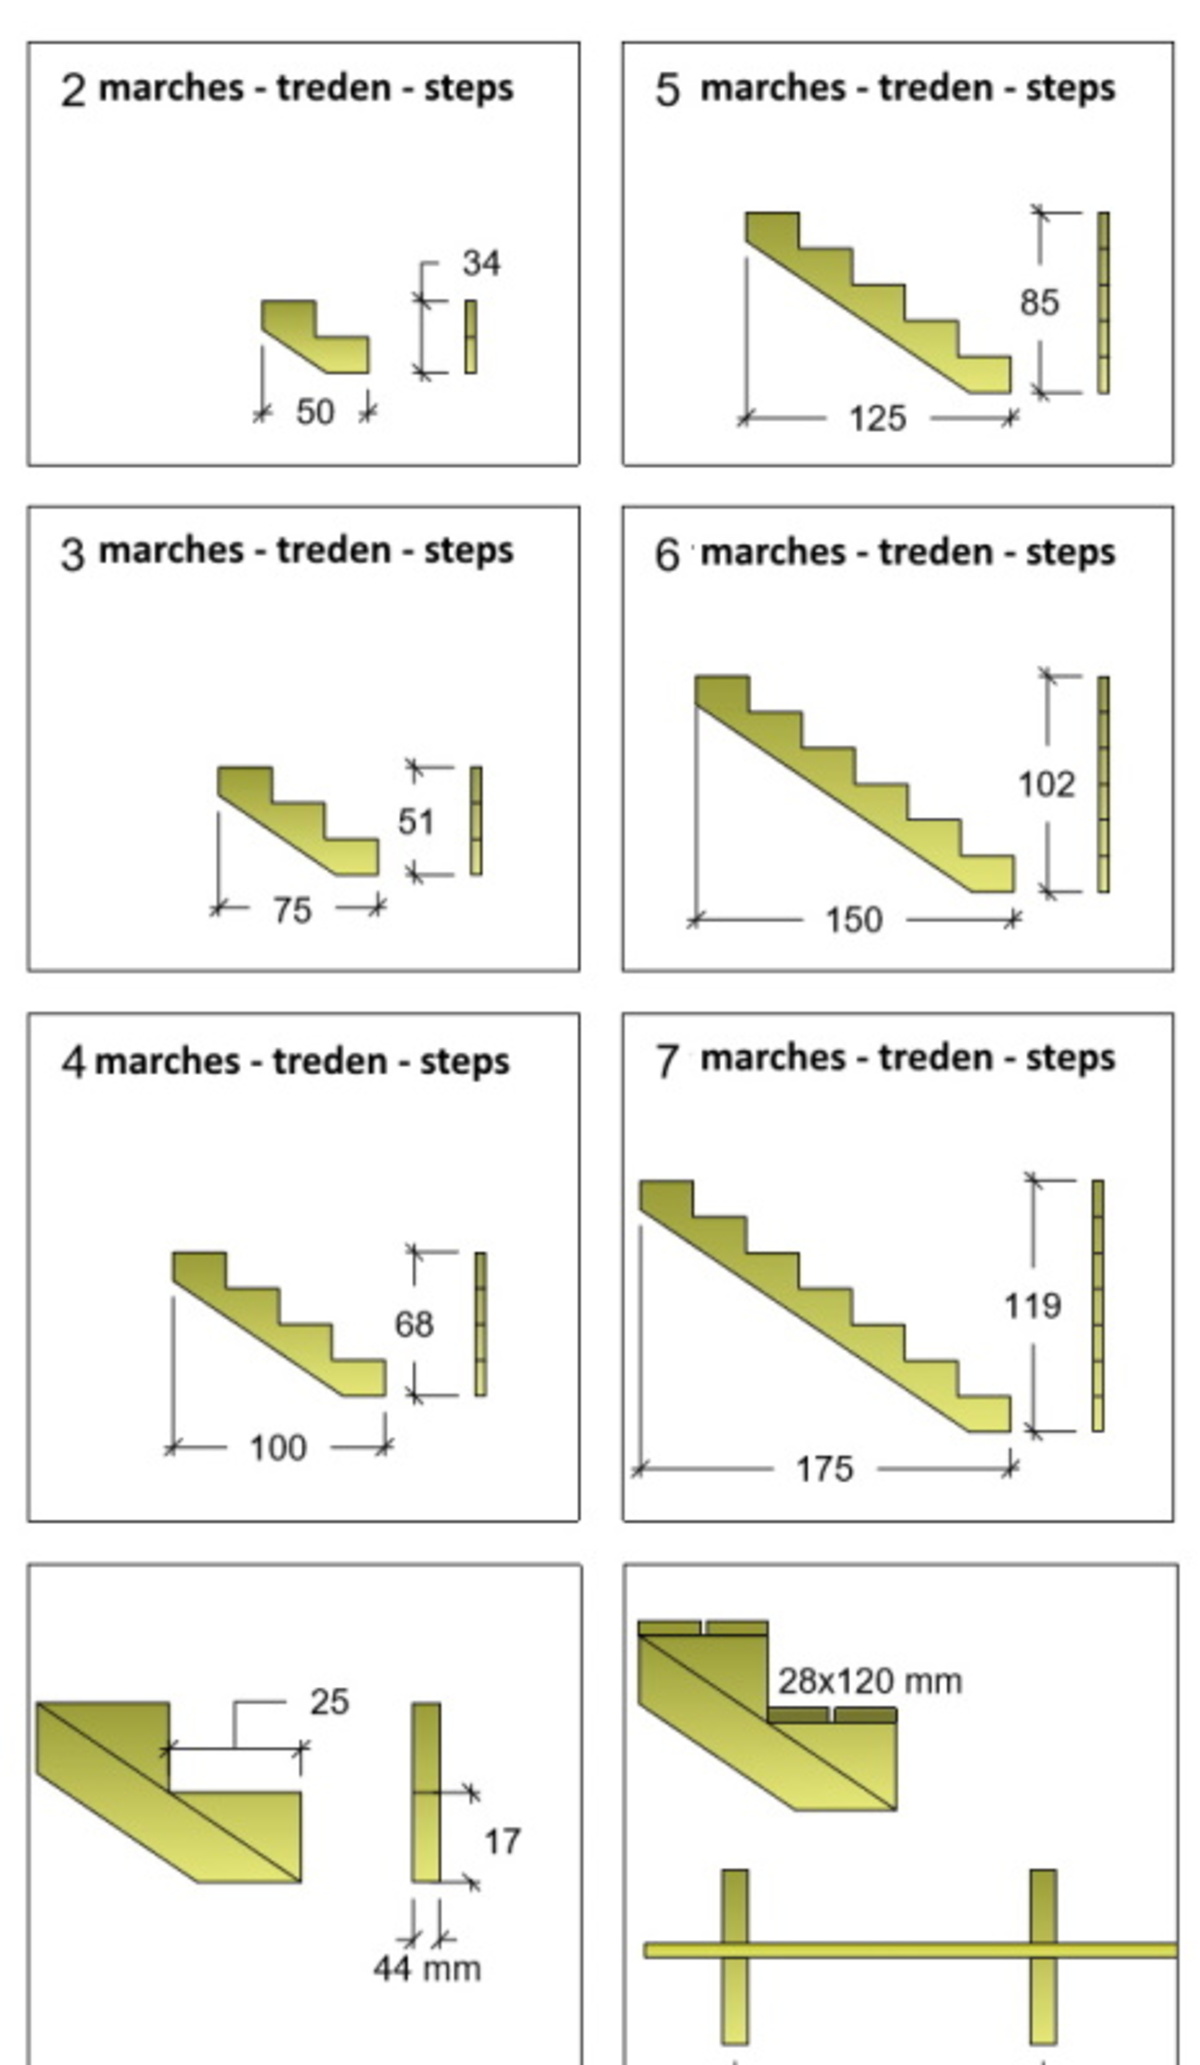 Dimensions of wooden stair stringers